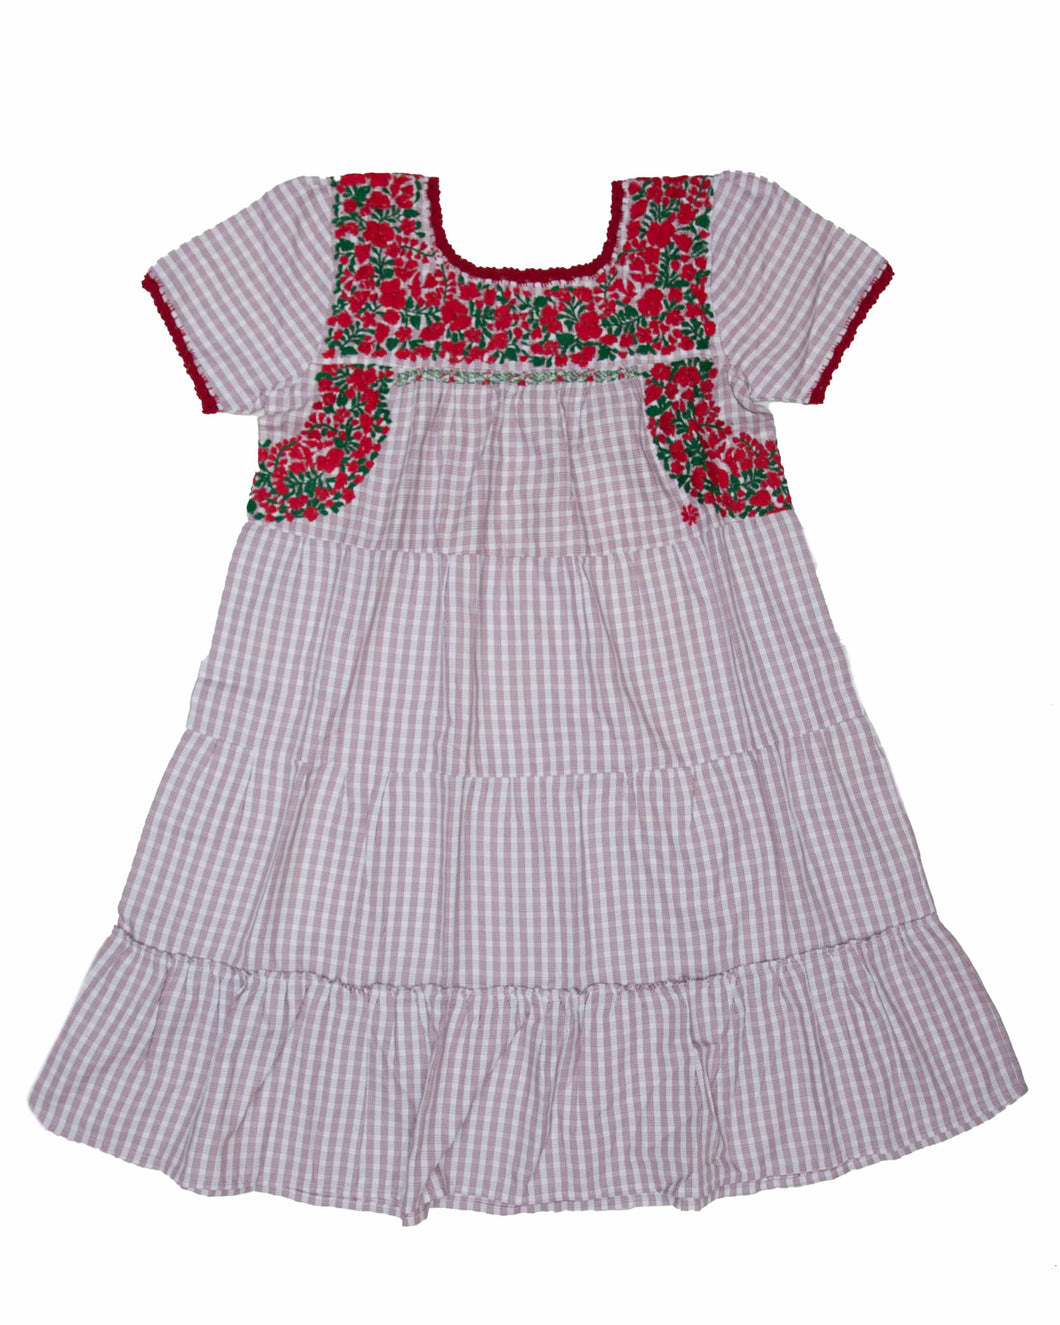 Girls Gabriela Dress | Red & White Stripes with Red